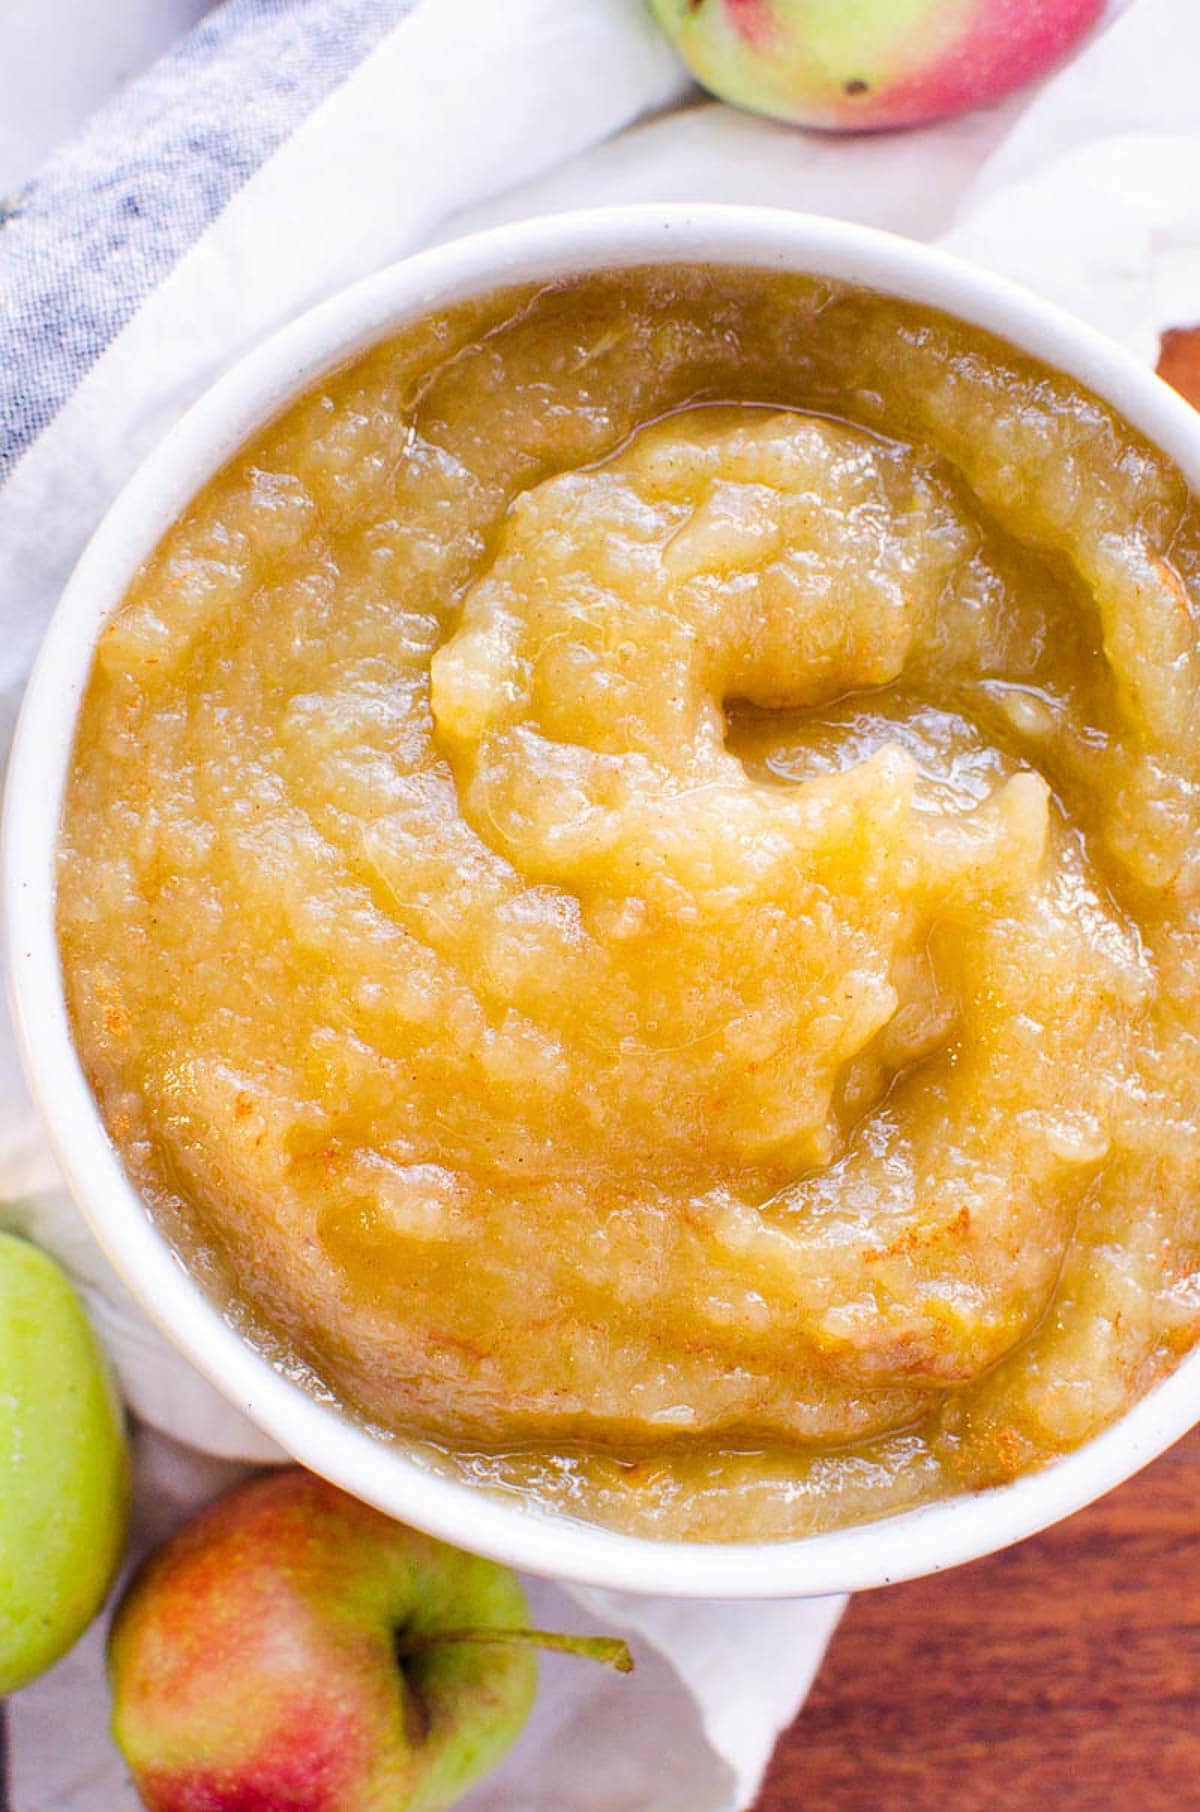 applesauce in a bowl